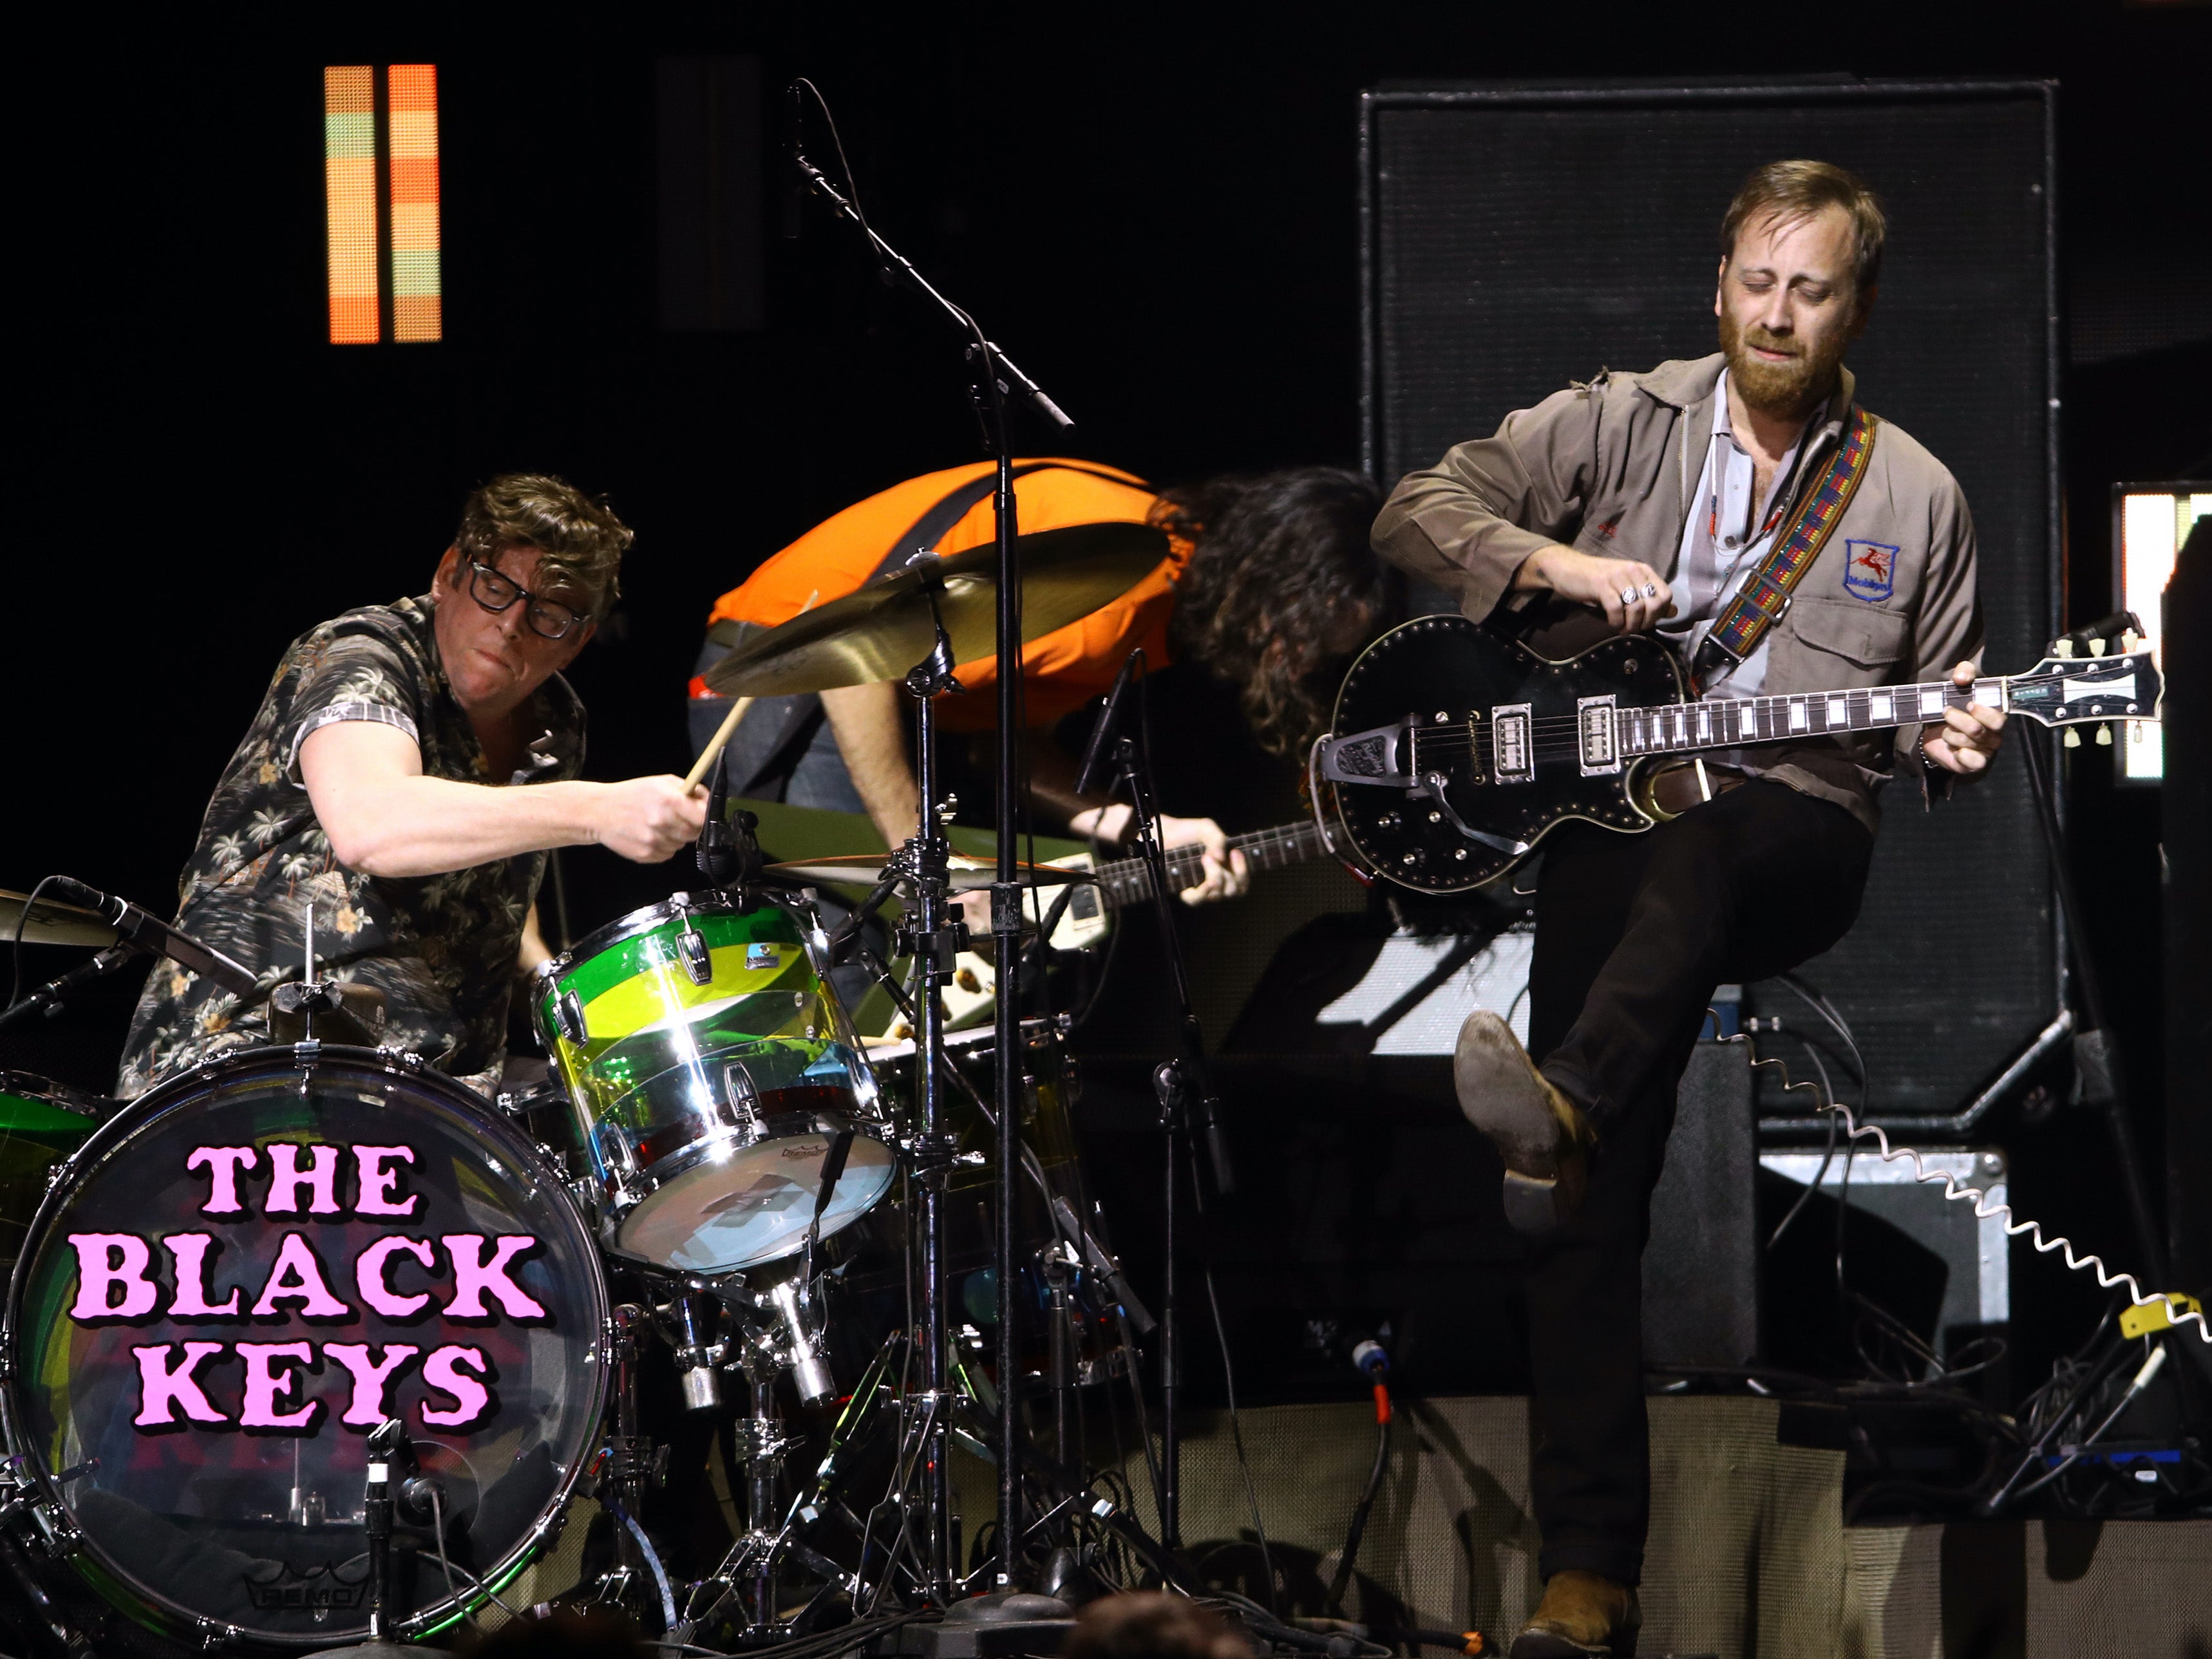 5 Things You Might Not Have Known About The Black Keys